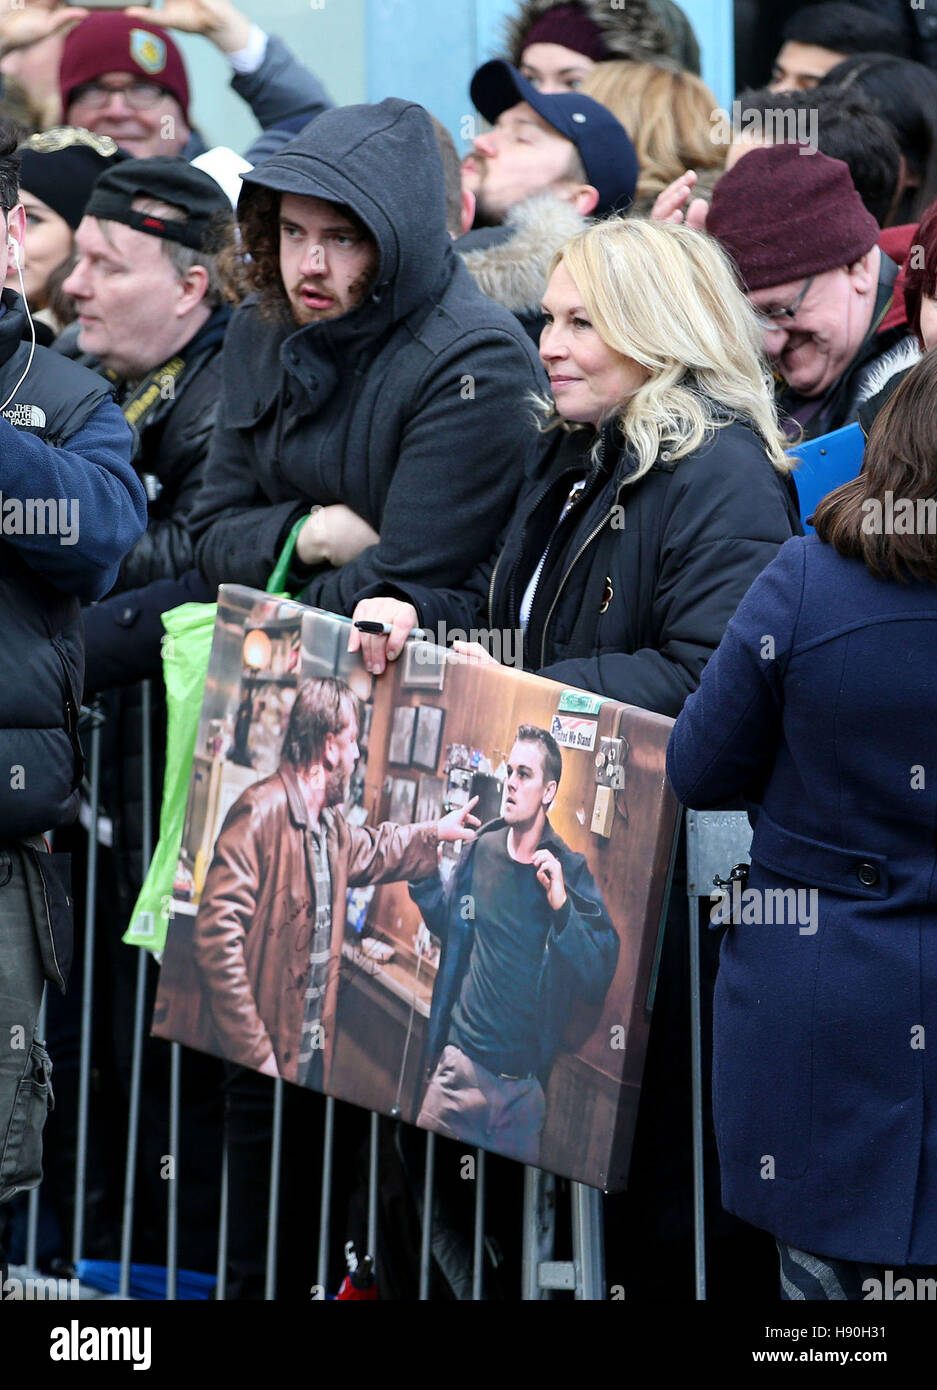 NOTE ALTERNATE CROP Carol Honeyman holds a large canvas of a scene from The Departed as she waits for Leonardo DiCaprio to arrive ahead of a visit to Home by Social Bite sandwich shops in Edinburgh, which work to help the homeless. Picture date: Thursday November 17, 2016. See PA story SHOWBIZ DiCaprio. Photo credit should read: Jane Barlow/PA Wire Stock Photo